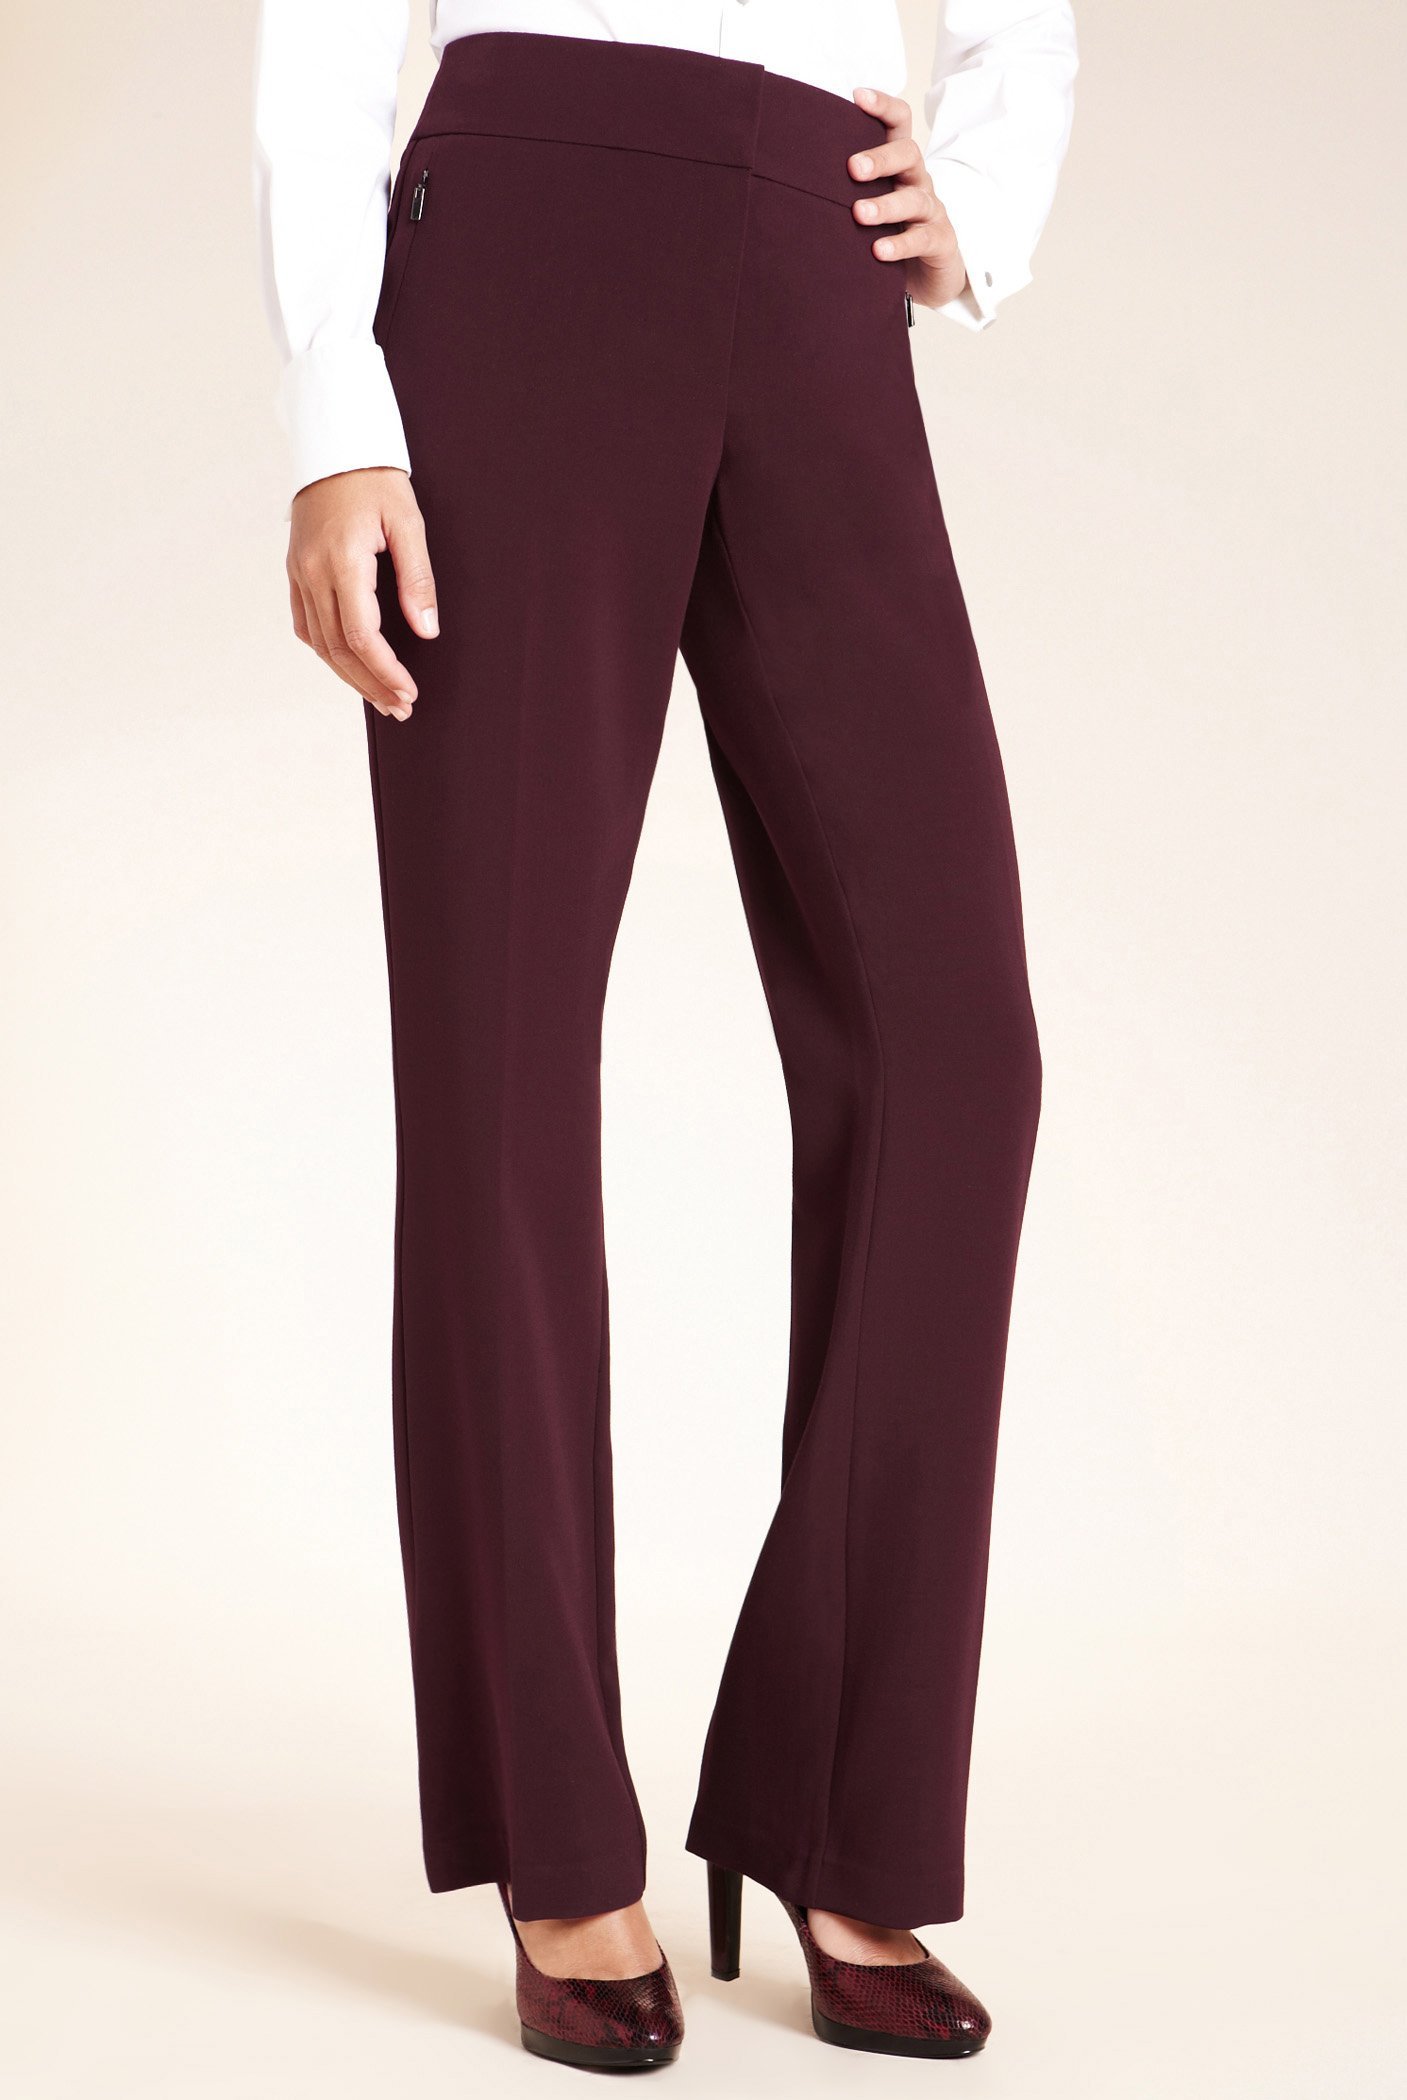 Marks and Spencer - - M&5 WINE Flat Front Zip Pockets Slim Bootleg ...